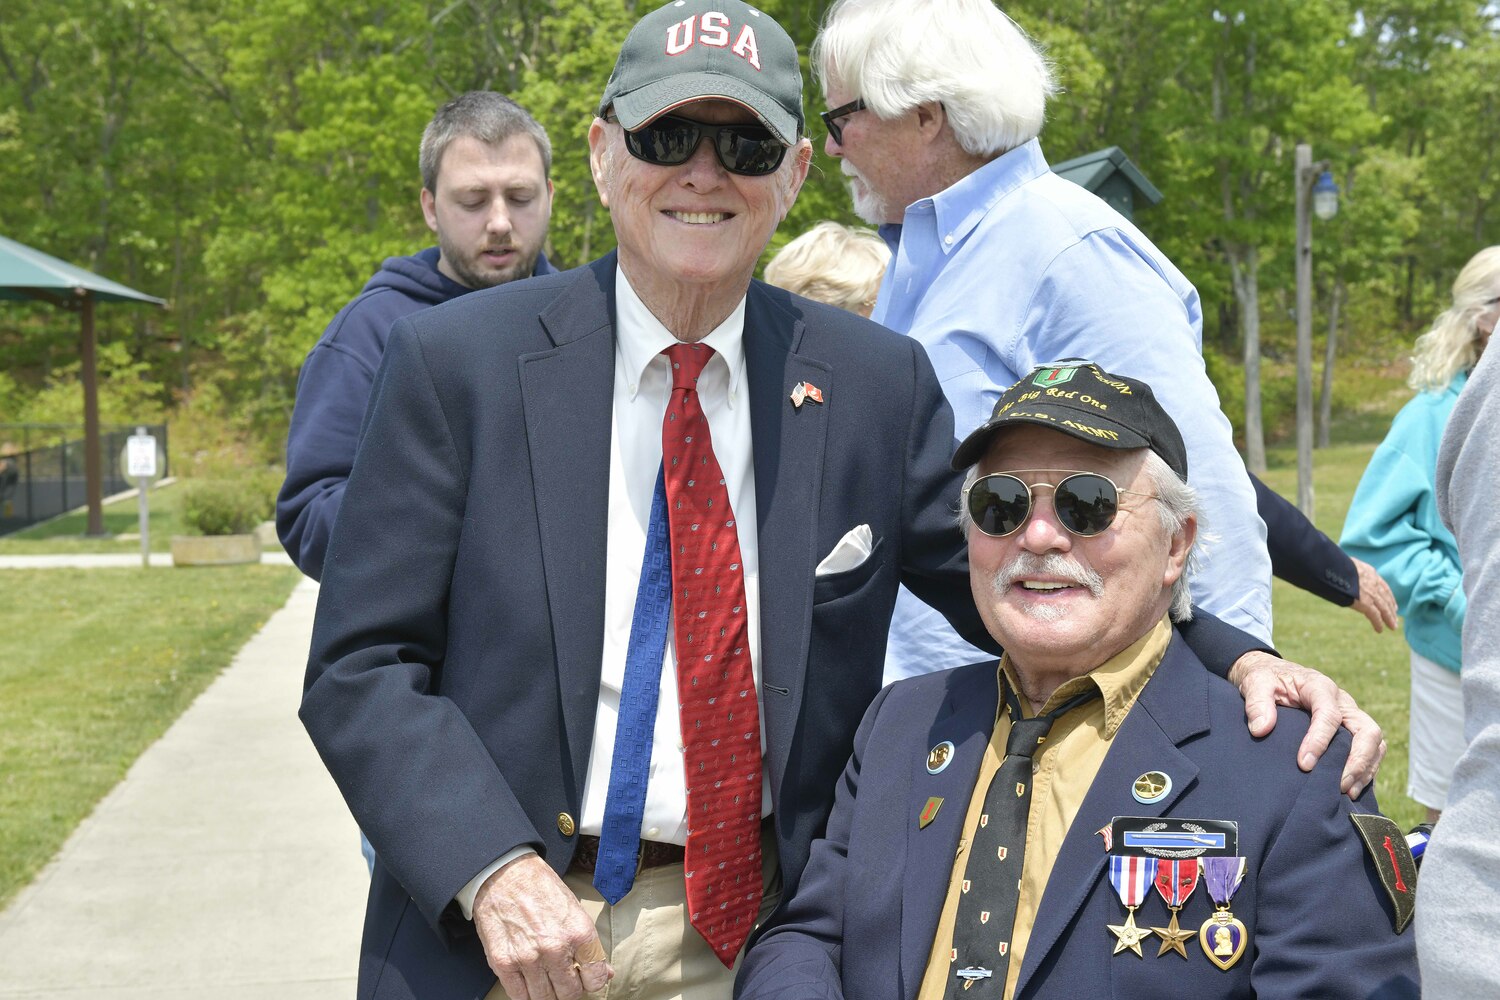 Judge Edward D. Burke Sr. and Ron Campsey at Good Ground Park in Hampton Bays on Monday after noon for the unveiling of the 